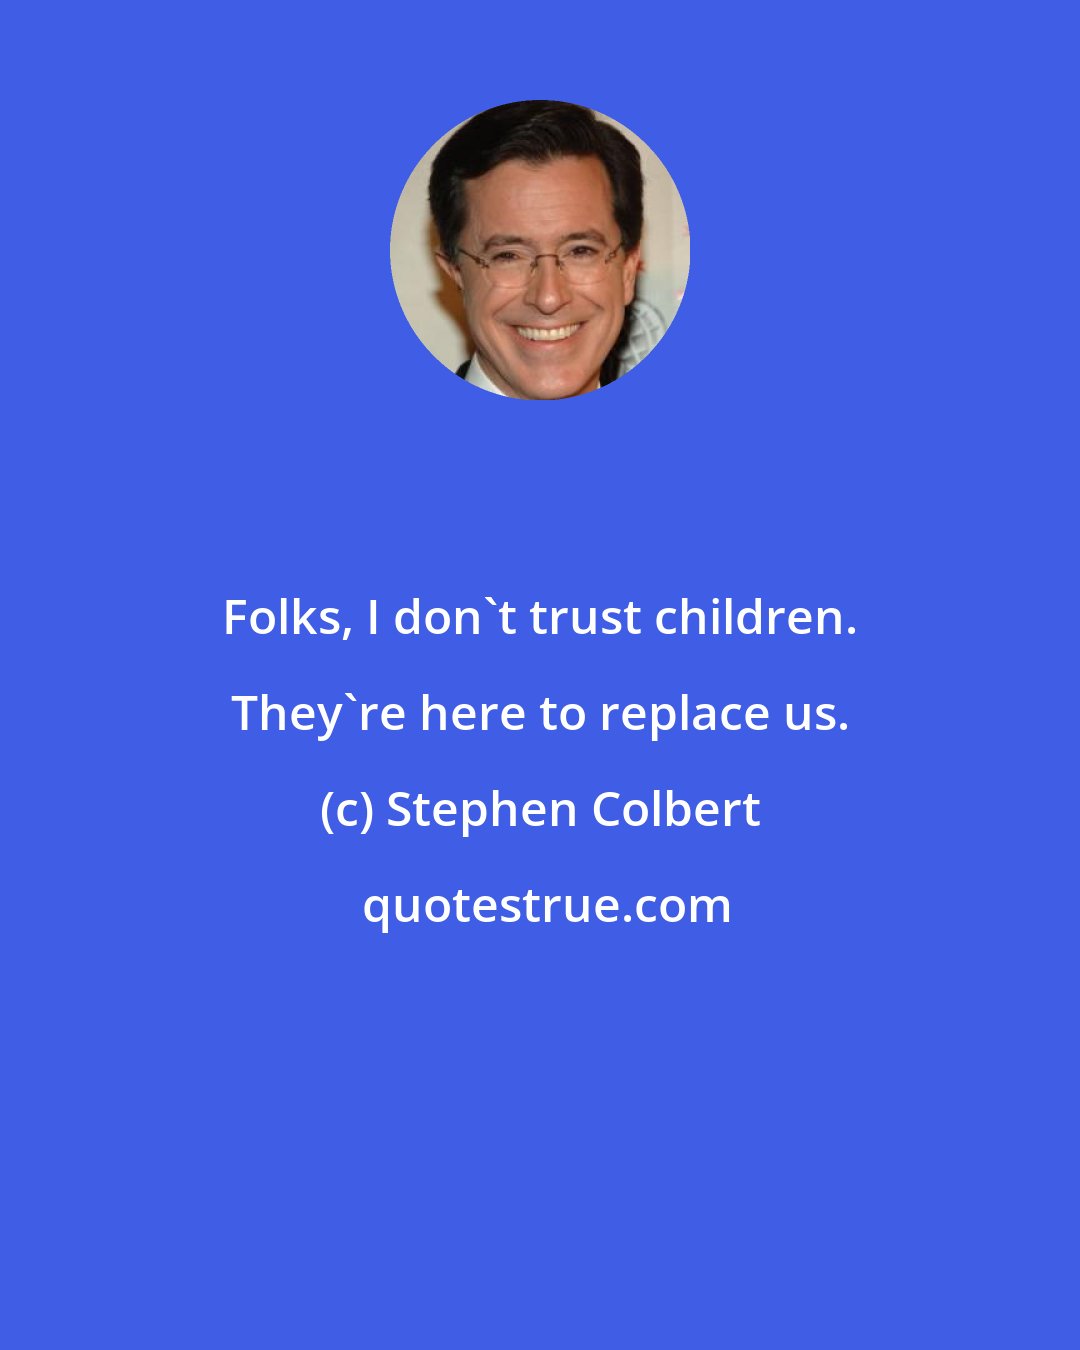 Stephen Colbert: Folks, I don't trust children. They're here to replace us.